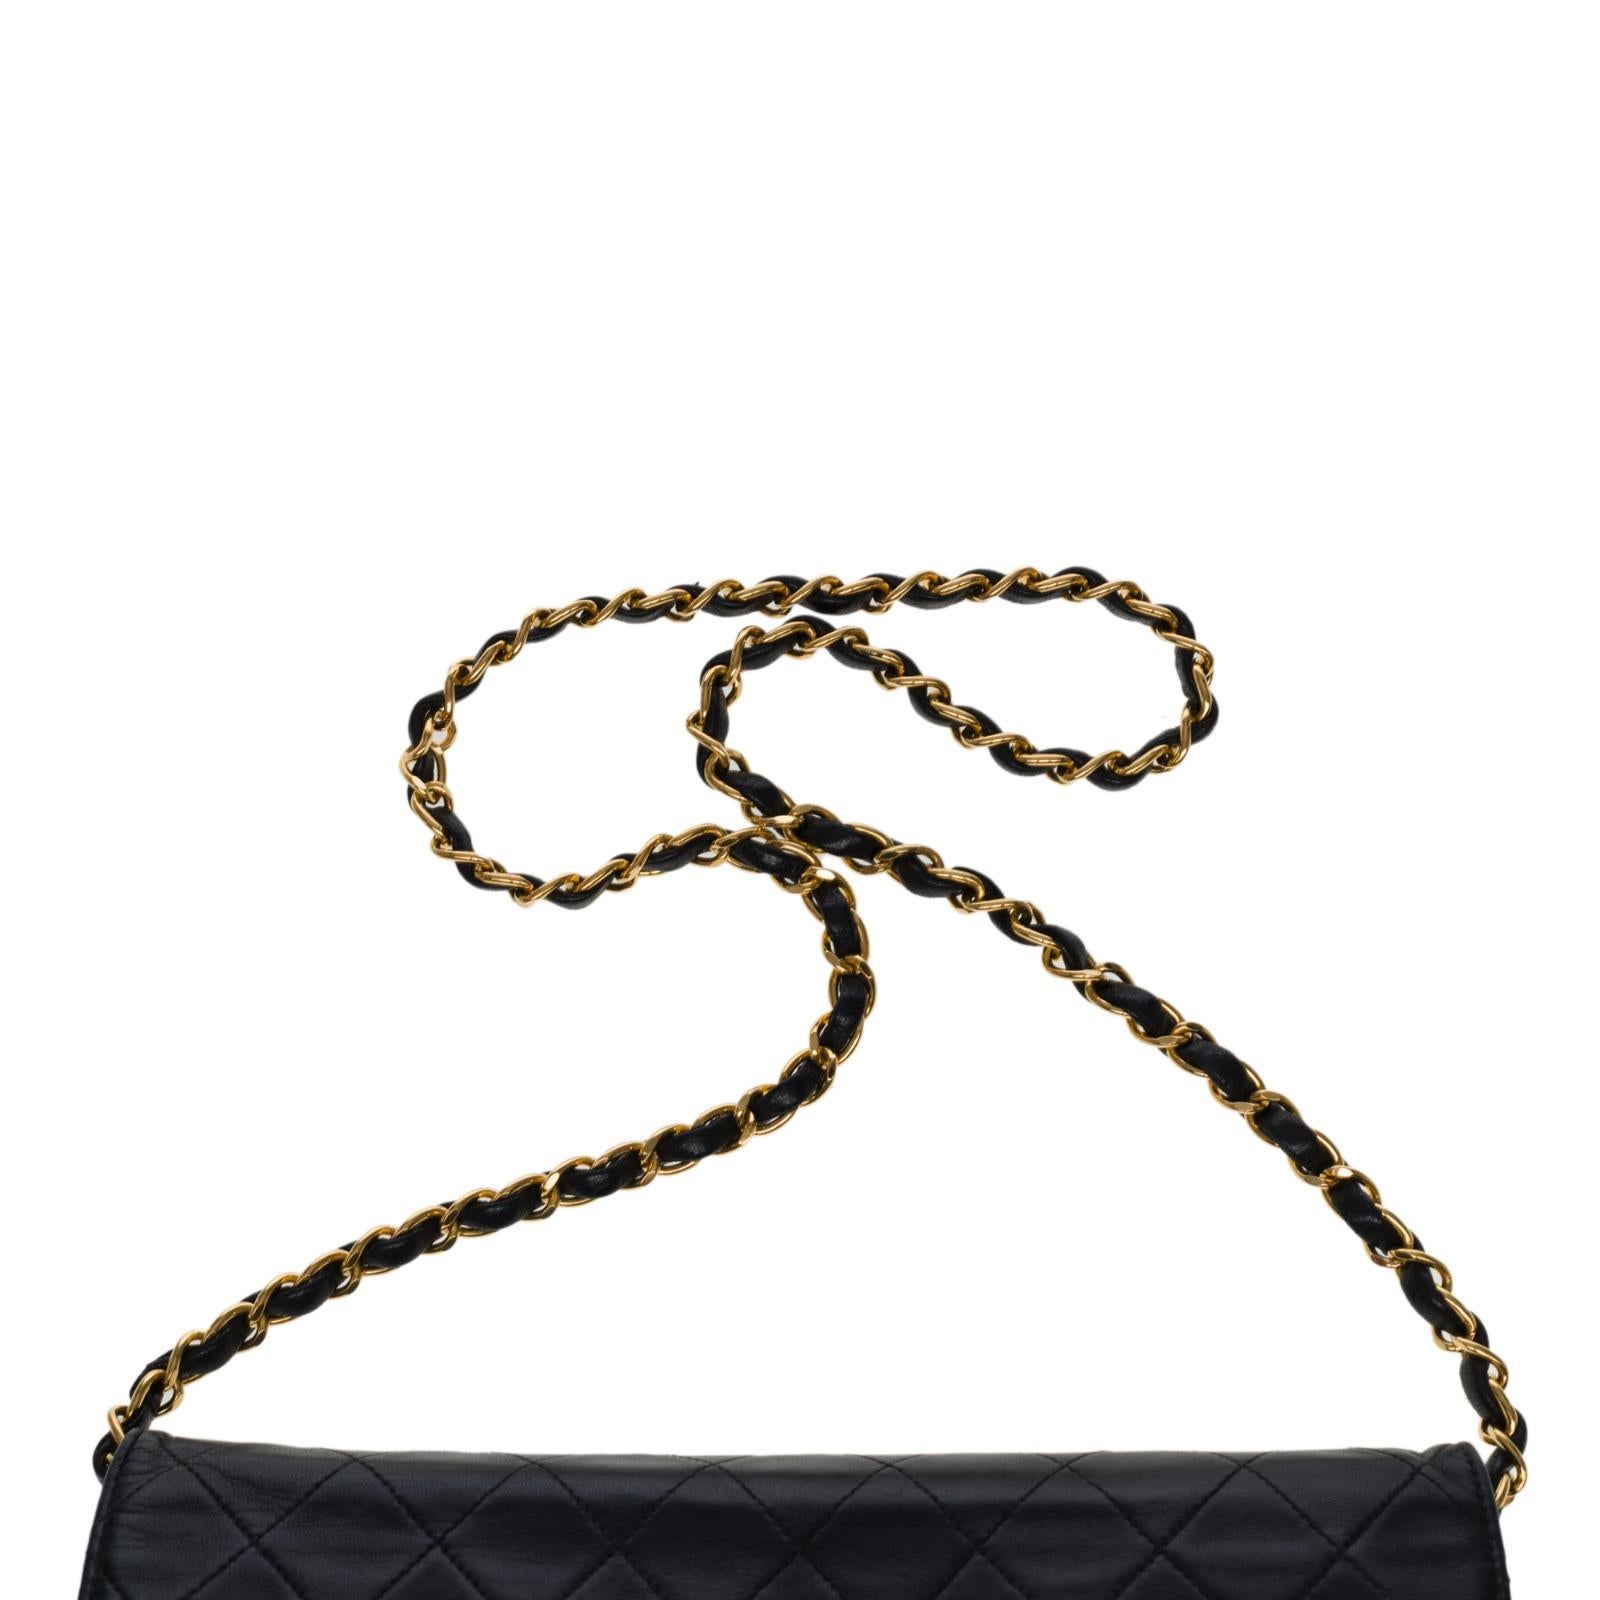 Chanel Classique flap bag bag in black quilted leather, GHW For Sale 7